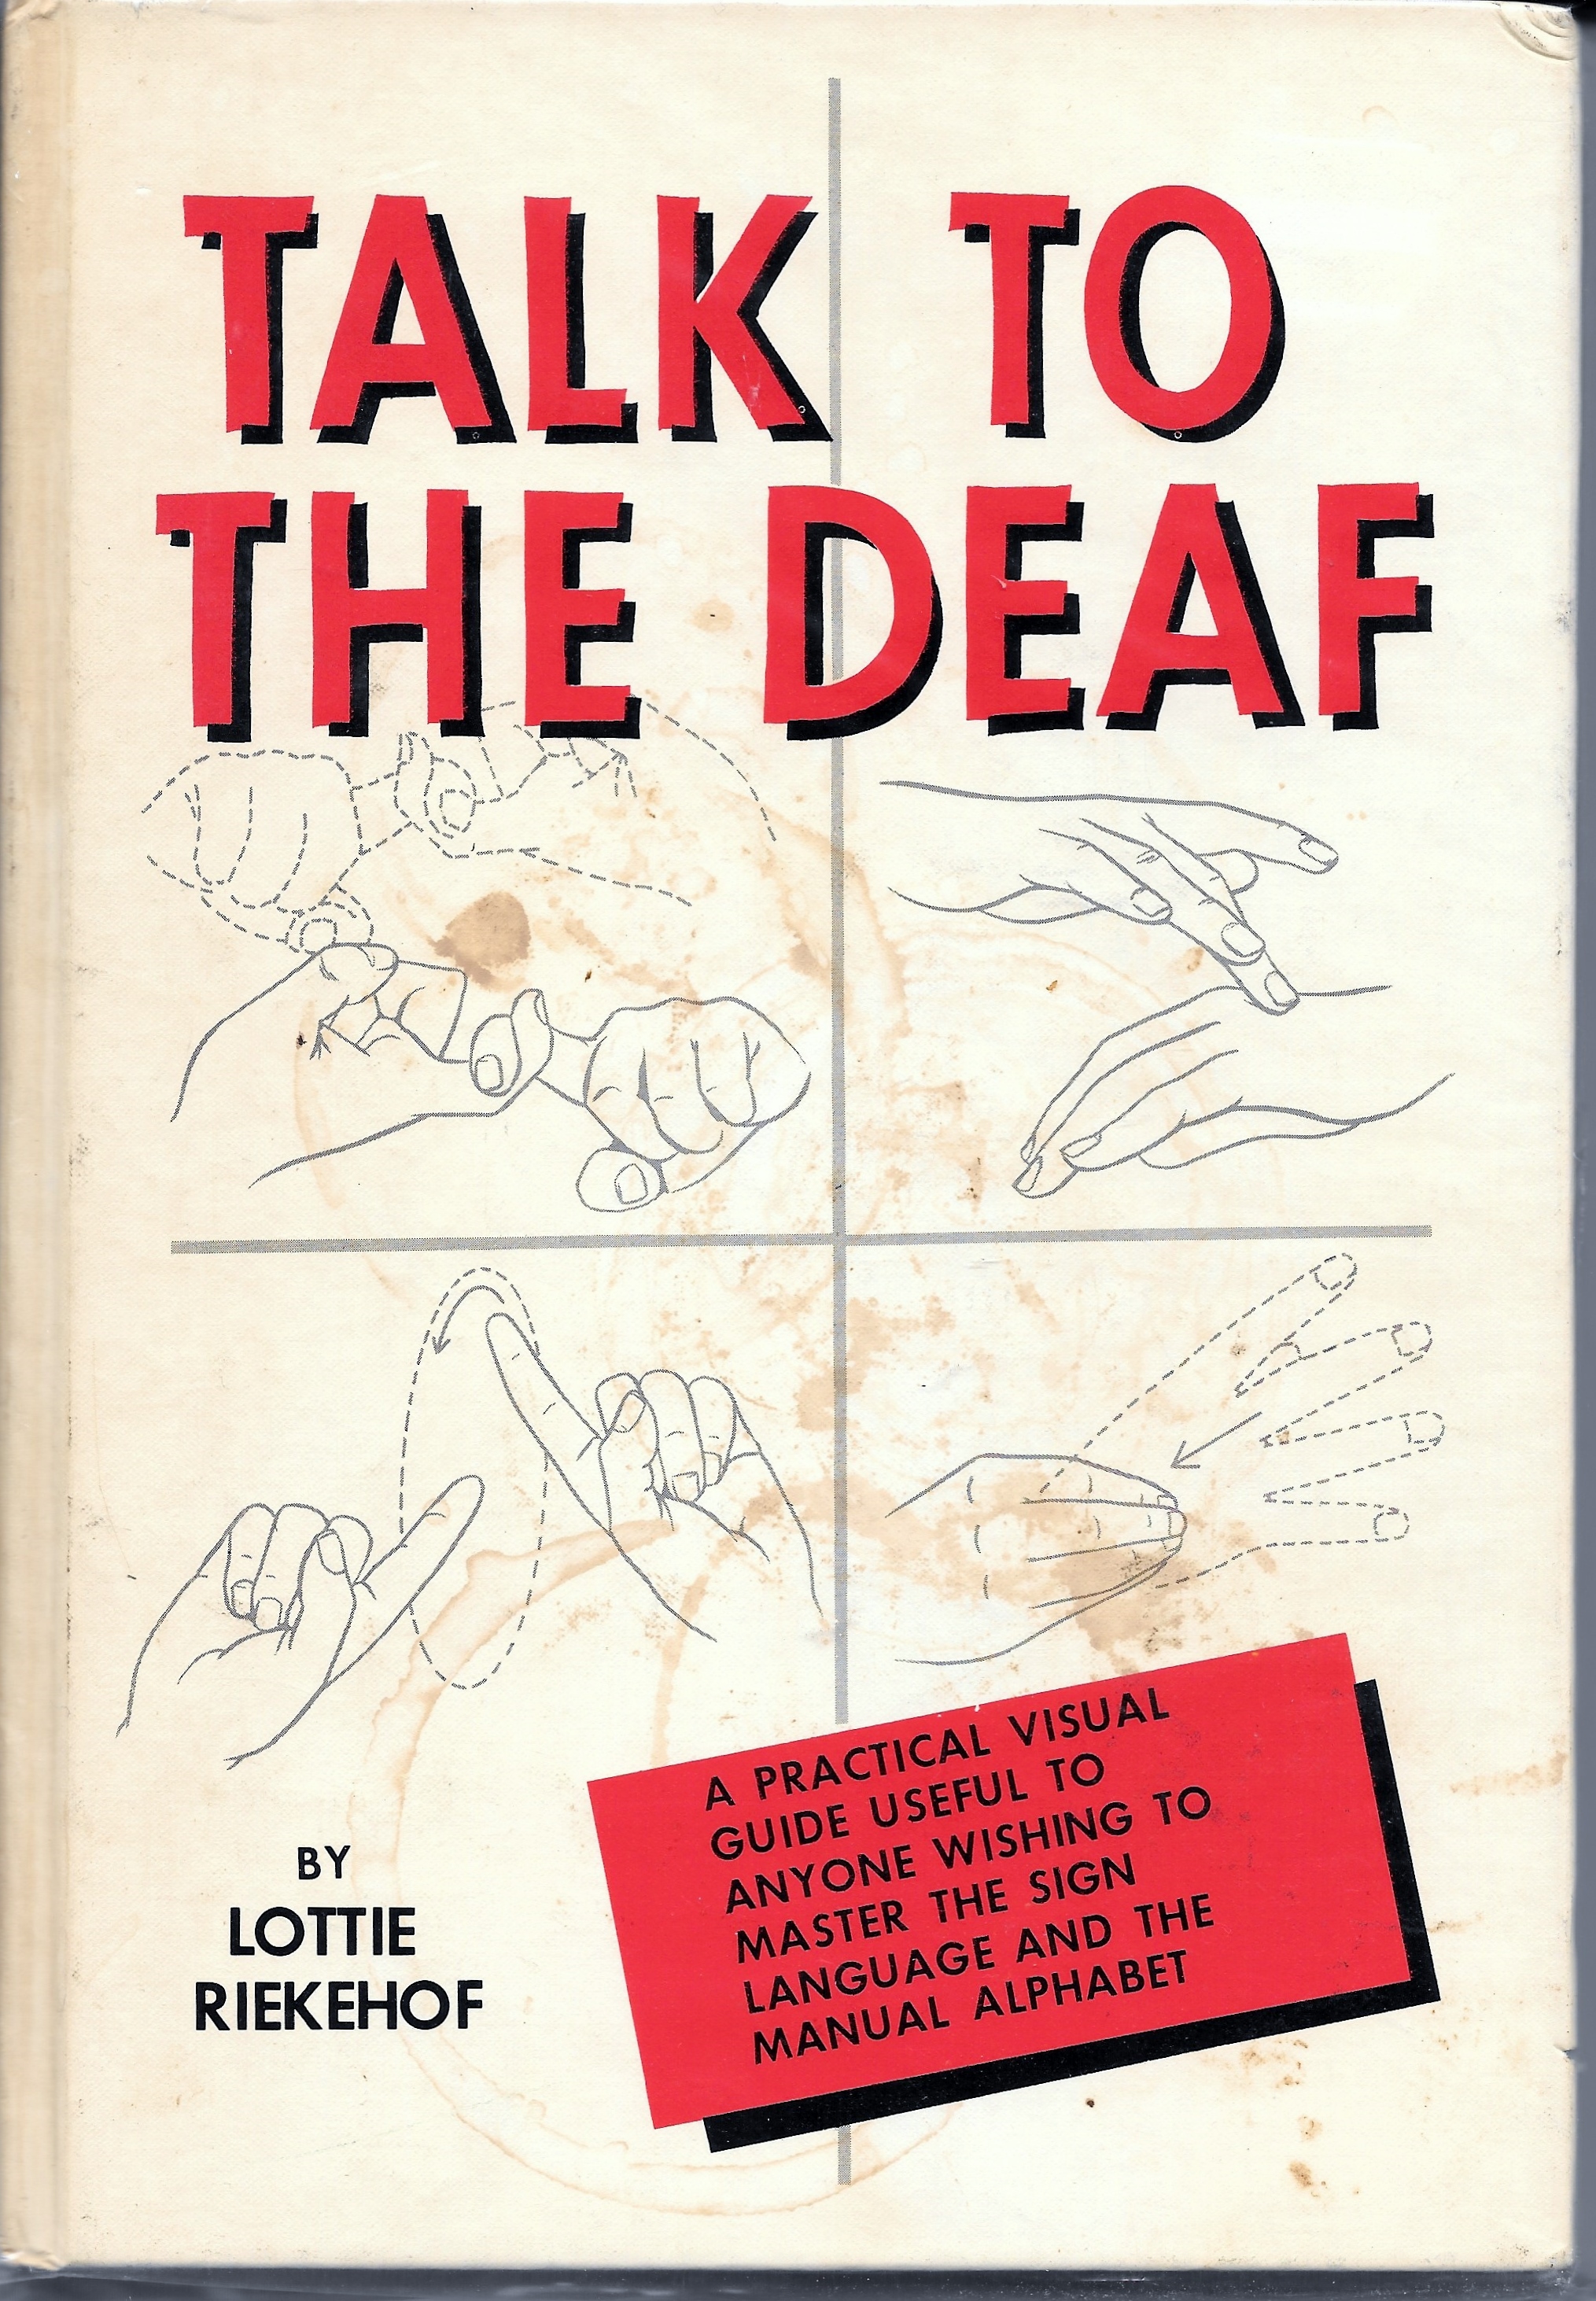 TALK TO THE DEAF A Manual of Approximately 1, 000 Signs Used by the Deaf in North America - Lottie L. Riekehof.